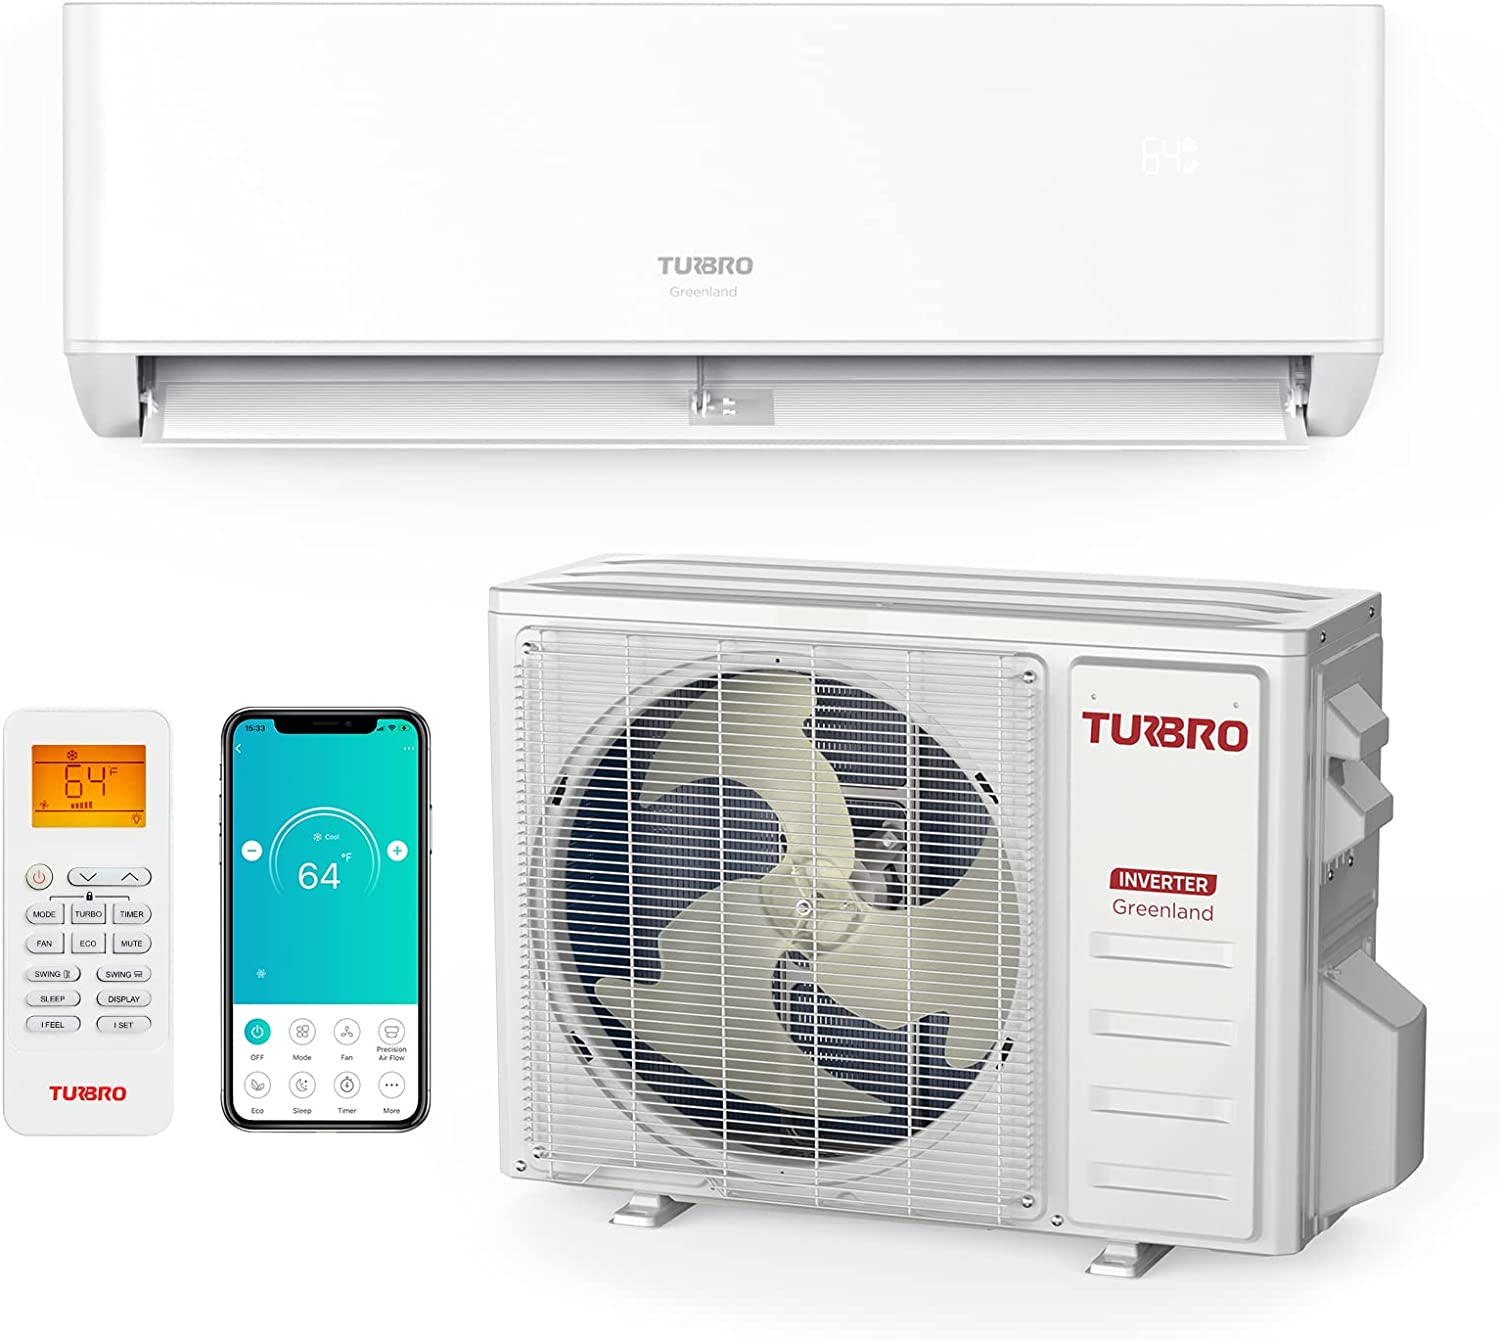 TURBRO 18,000 BTU Ductless Mini Split Inverter AC with Heat Pump, 22 SEER2, 230V, WiFi-Enabled, Cools up to 1,200 Sq.Ft, Energy Star, Greenland Series - image 1 of 7